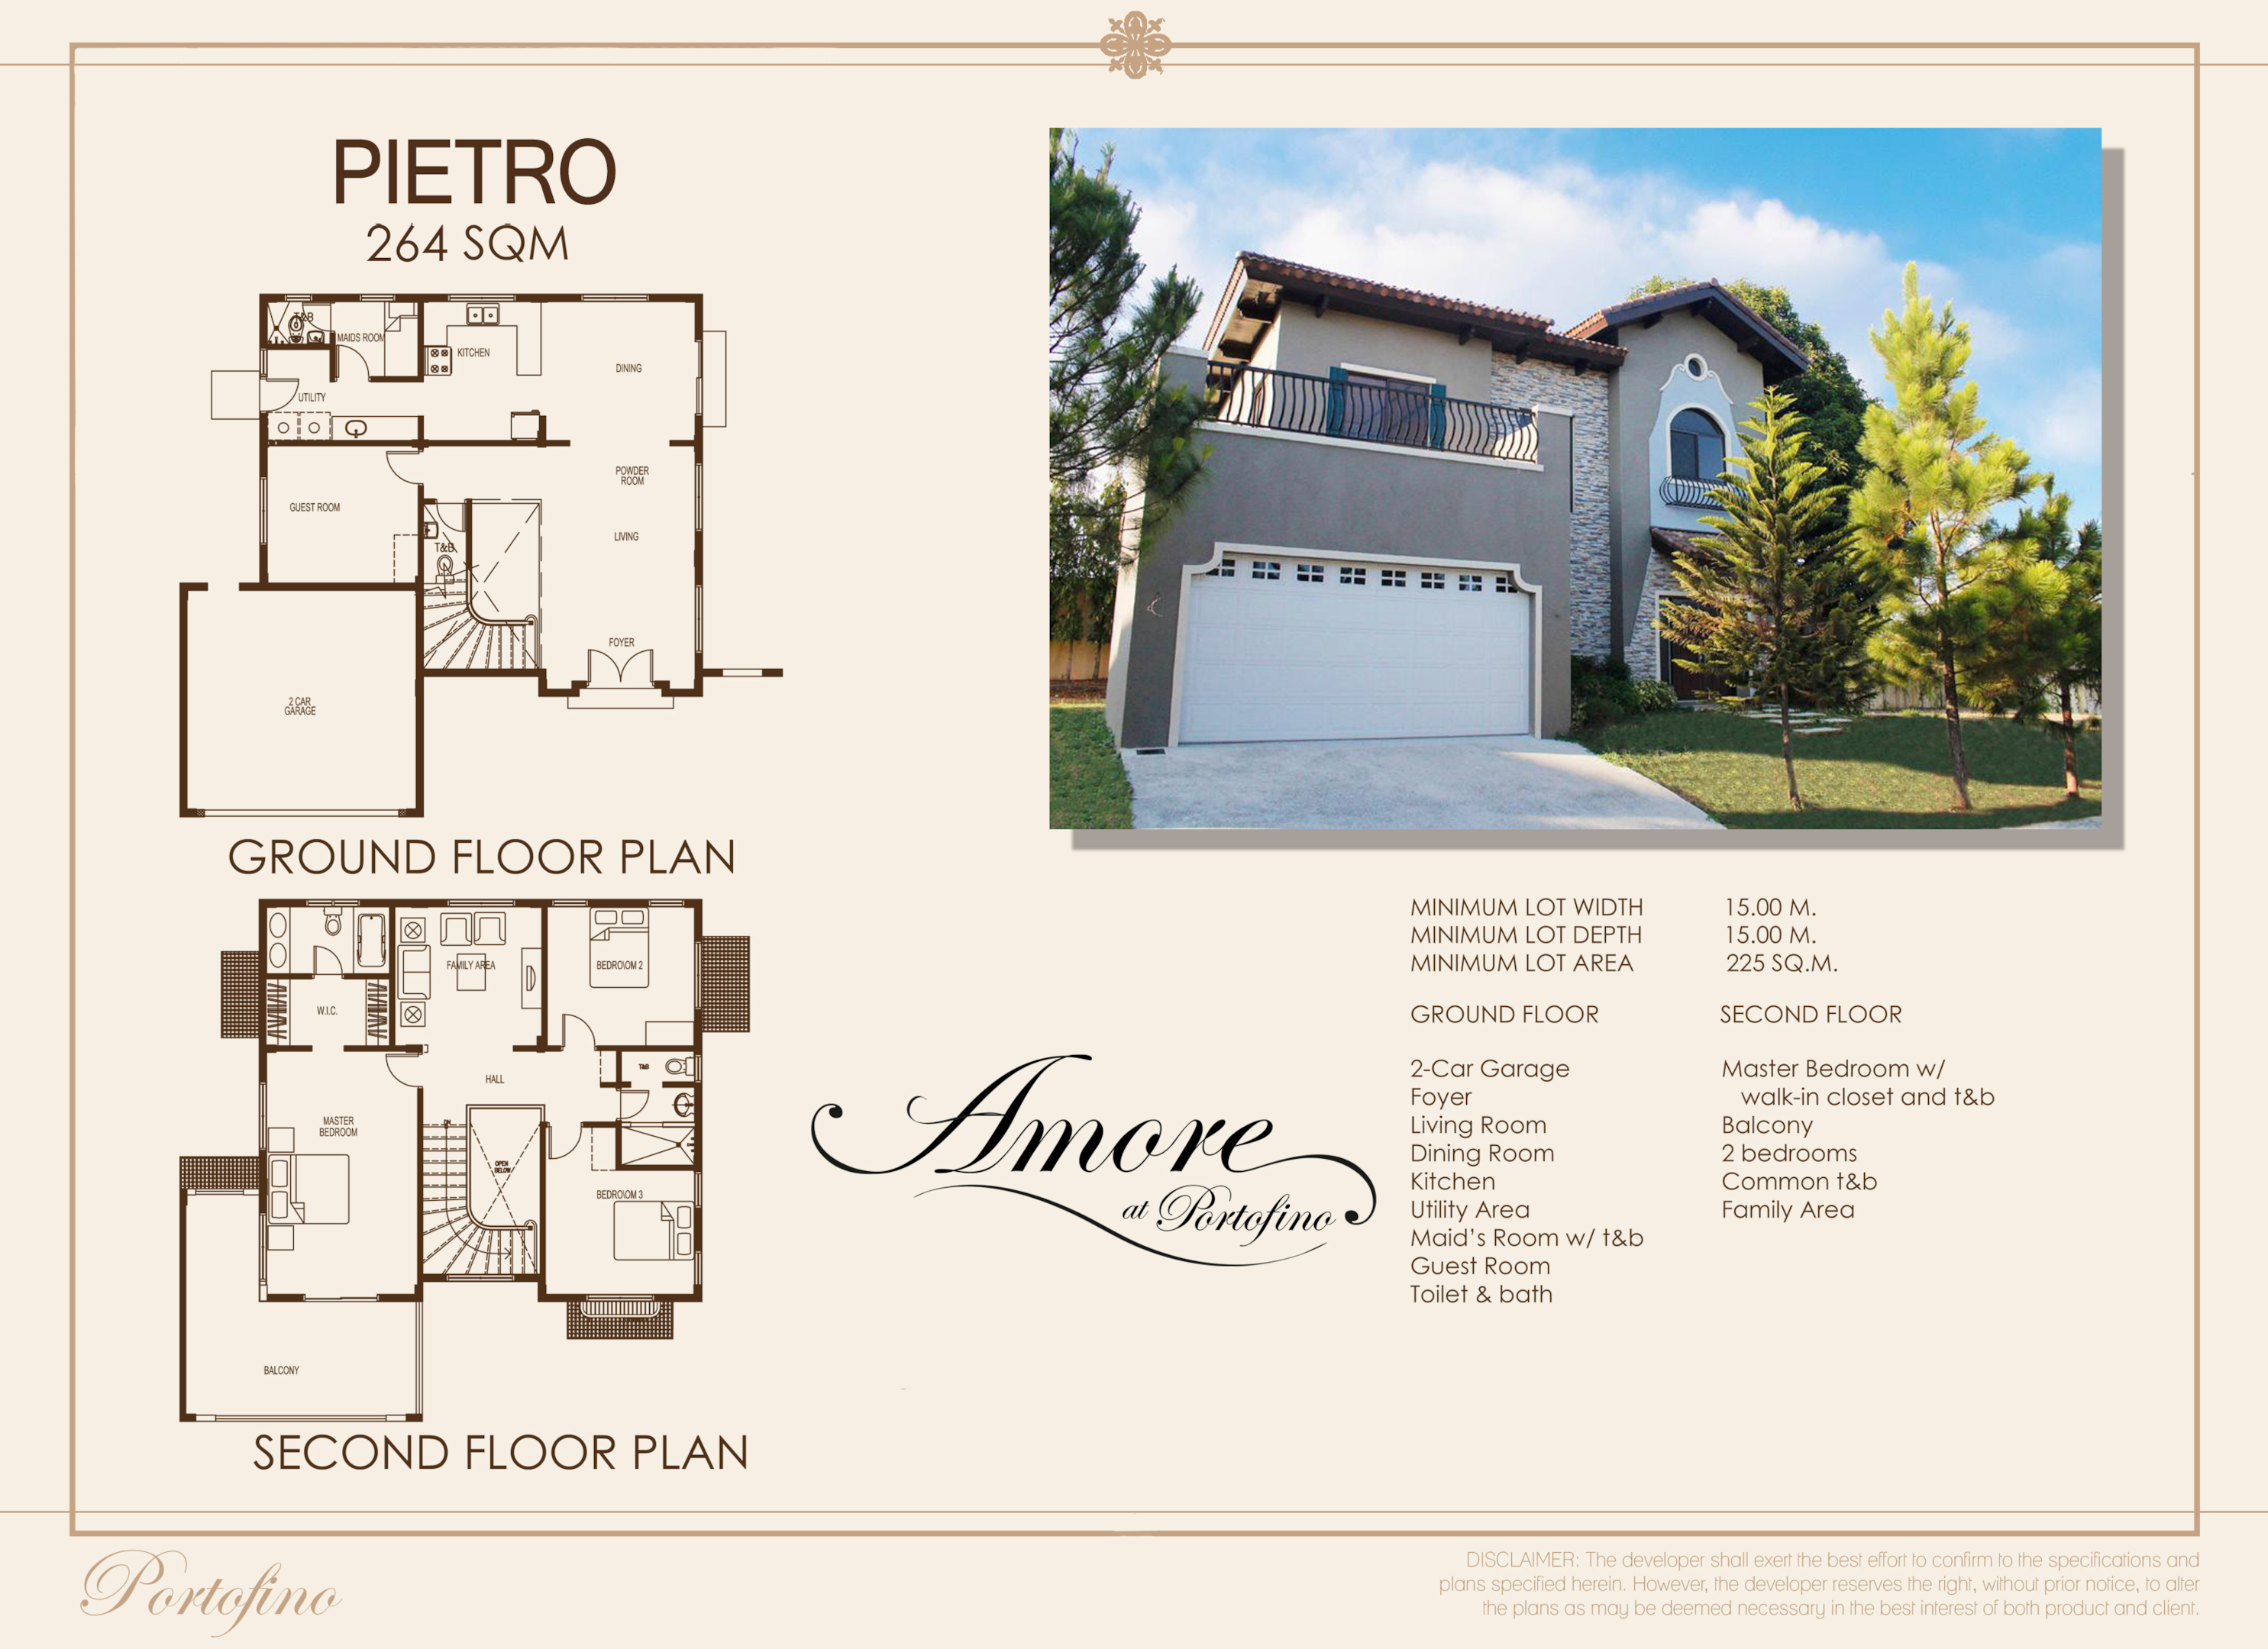 Image of Pietro Luxury house Floor Plan and House Specifications